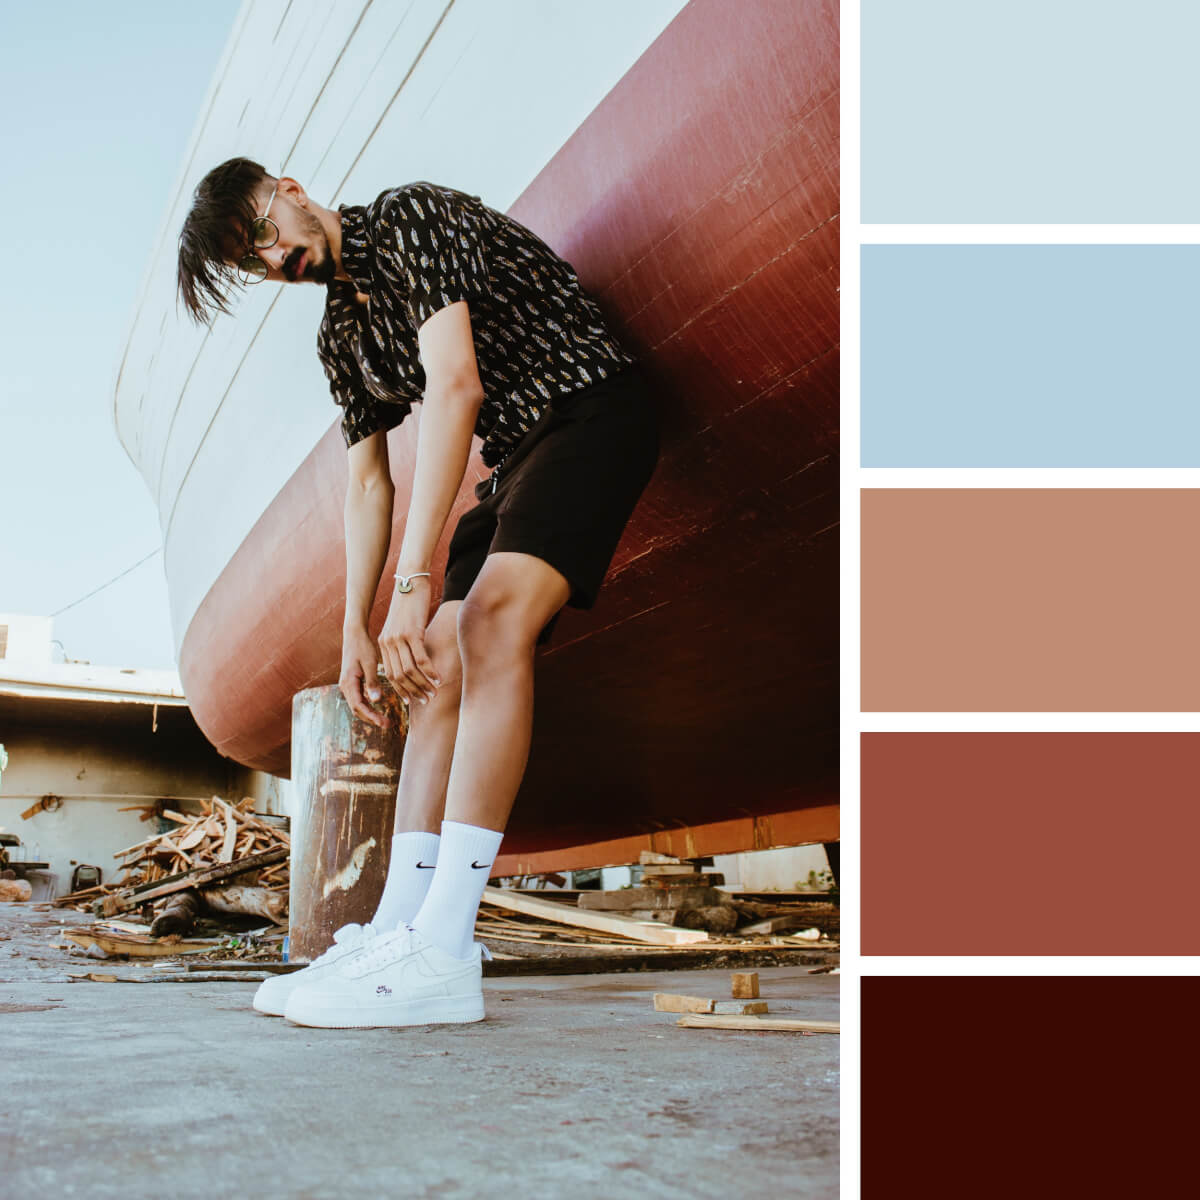 color combinations for travel